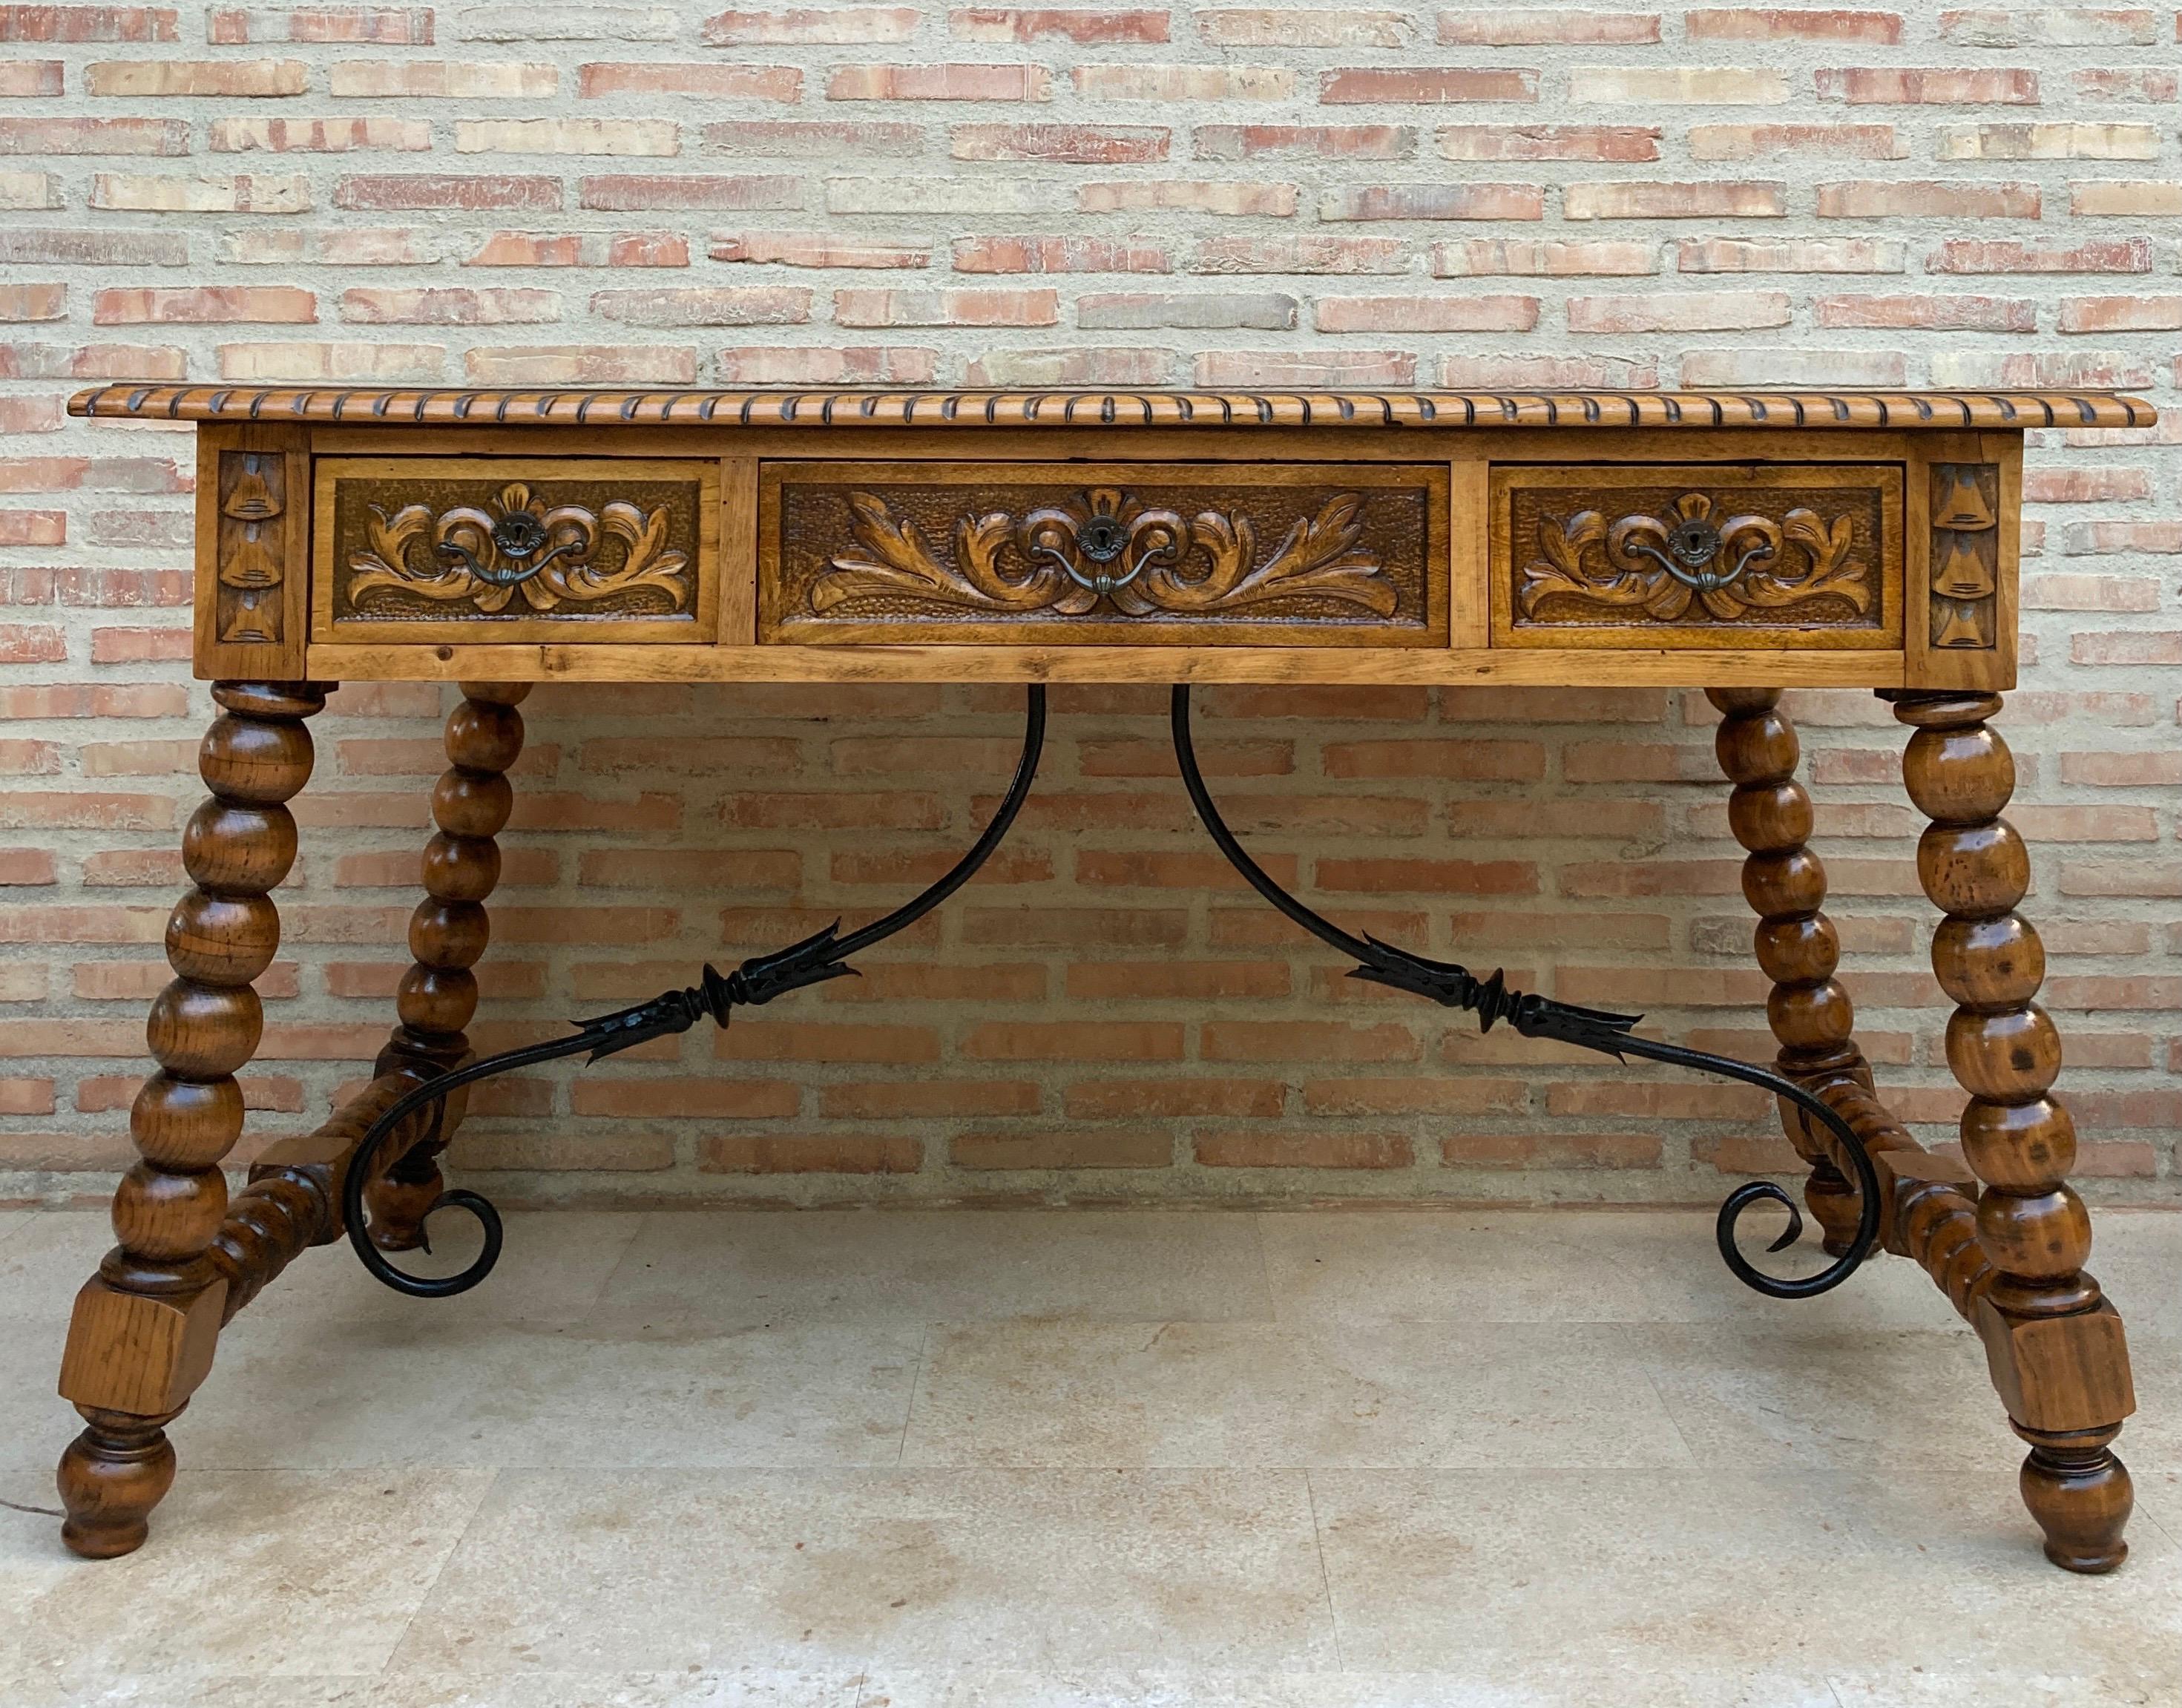 Vintage Design
19th French hand carved oak wood table desk with iron stretcher.
This antique French hand carved oak wood desk features a beautiful carved wooden top on the side of the table embossed in a buttery camel color. The base has